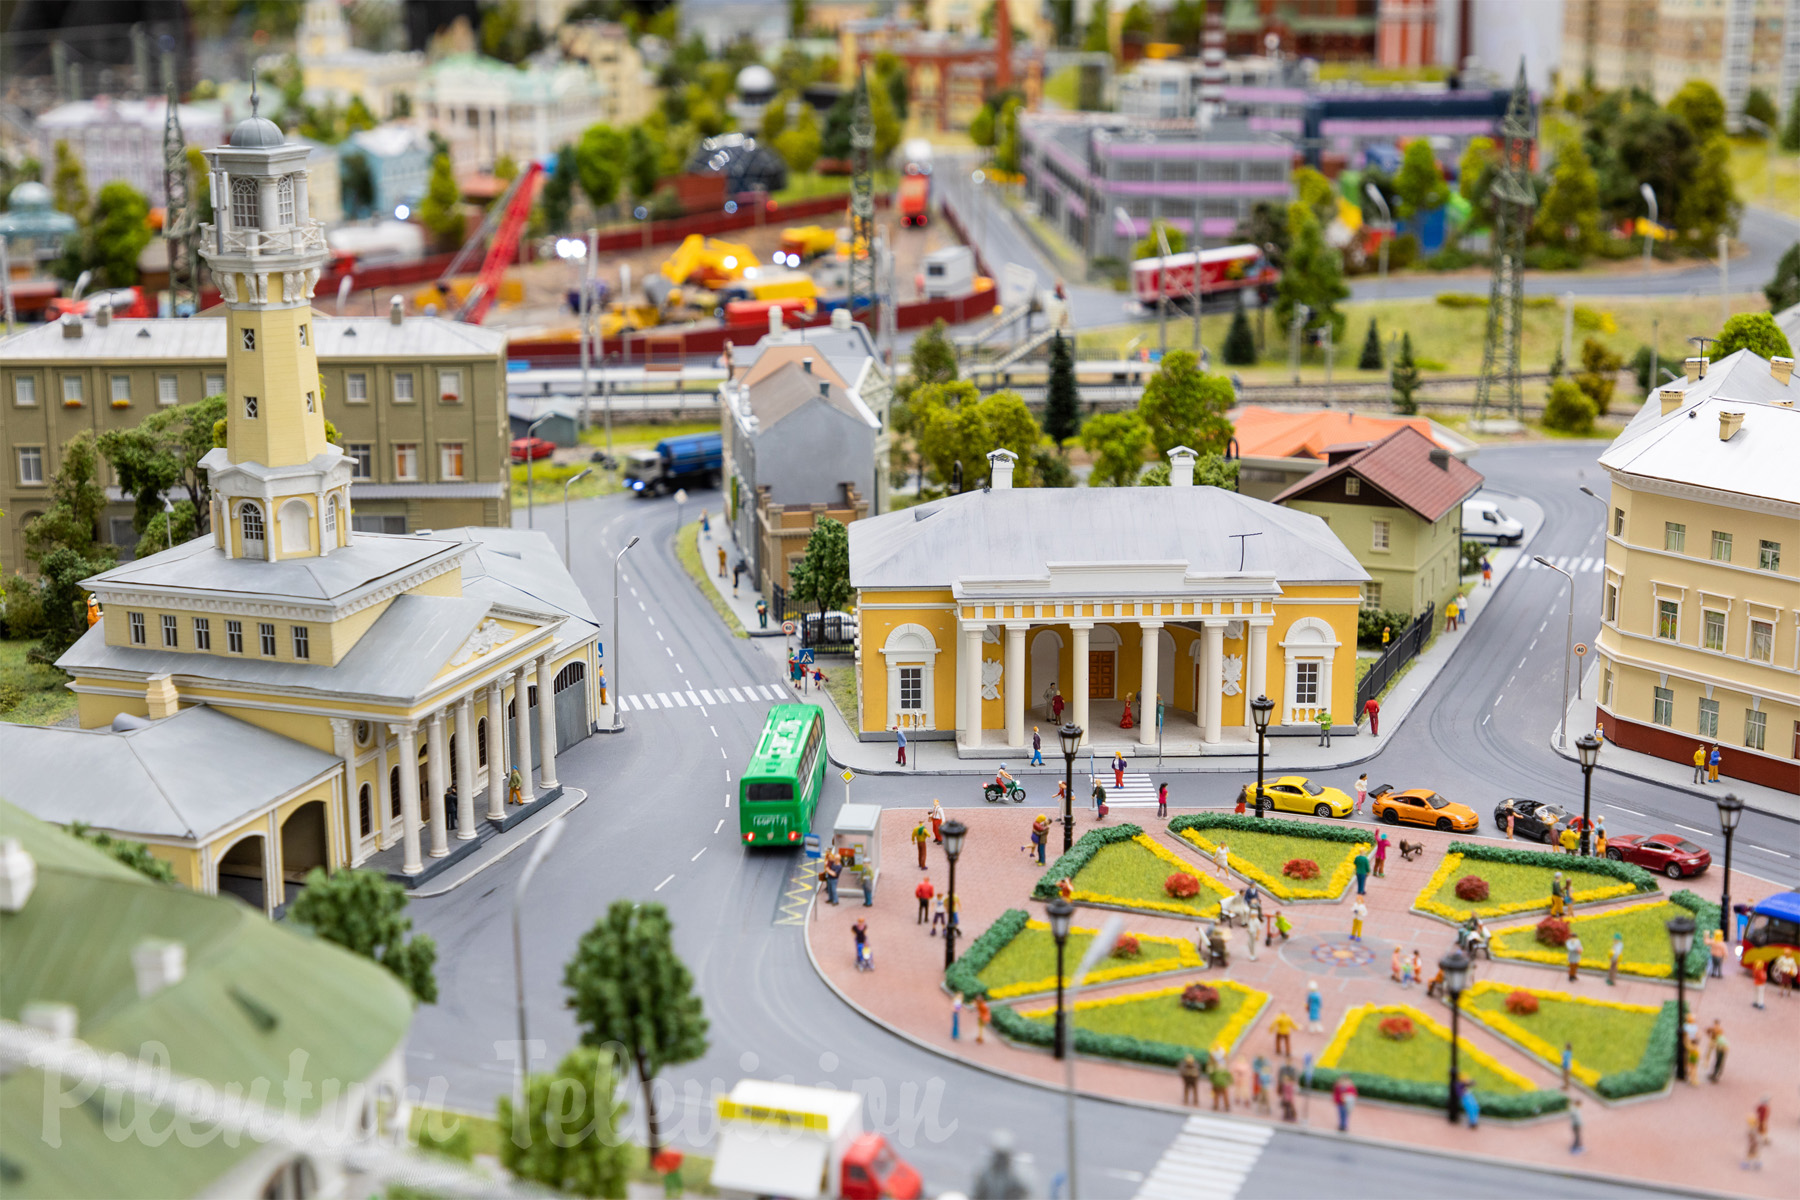 Model trains in Russia - One of the most beautiful HO scale model railway layouts - Макет Золотого кольца России